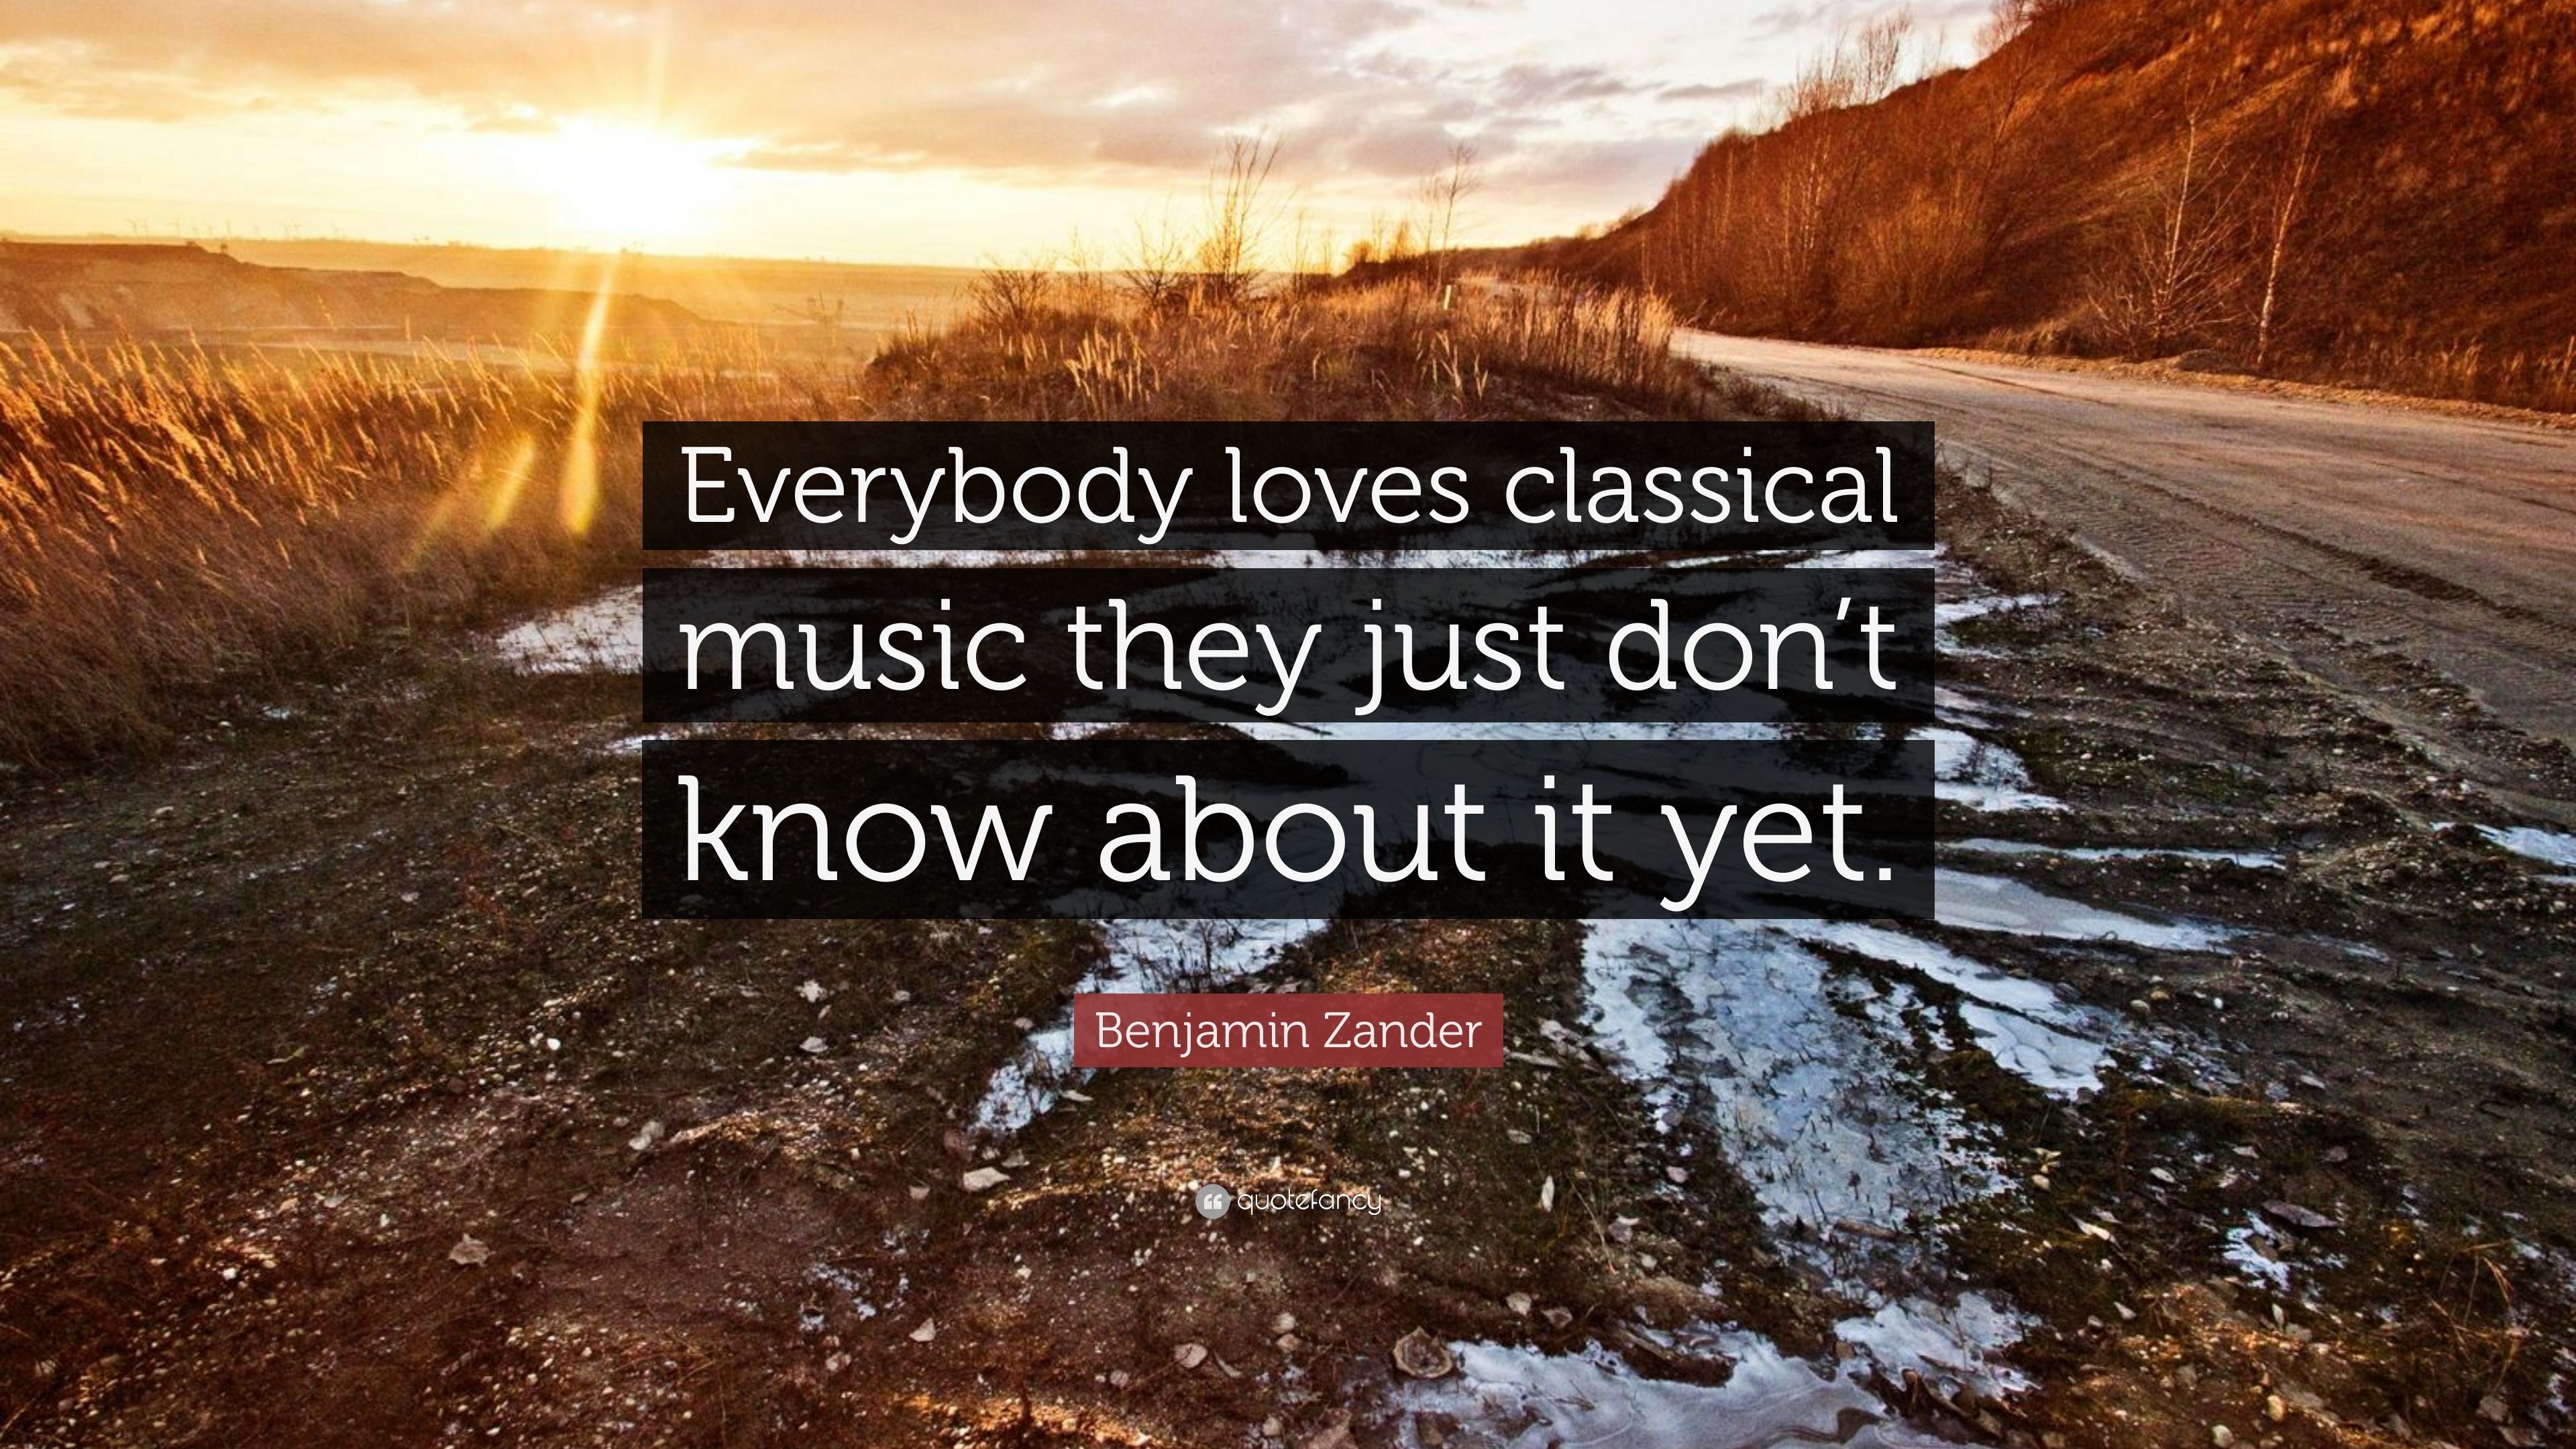 3840x2160 Benjamin Zander Quote: “Everybody loves classical music they just don't  know about